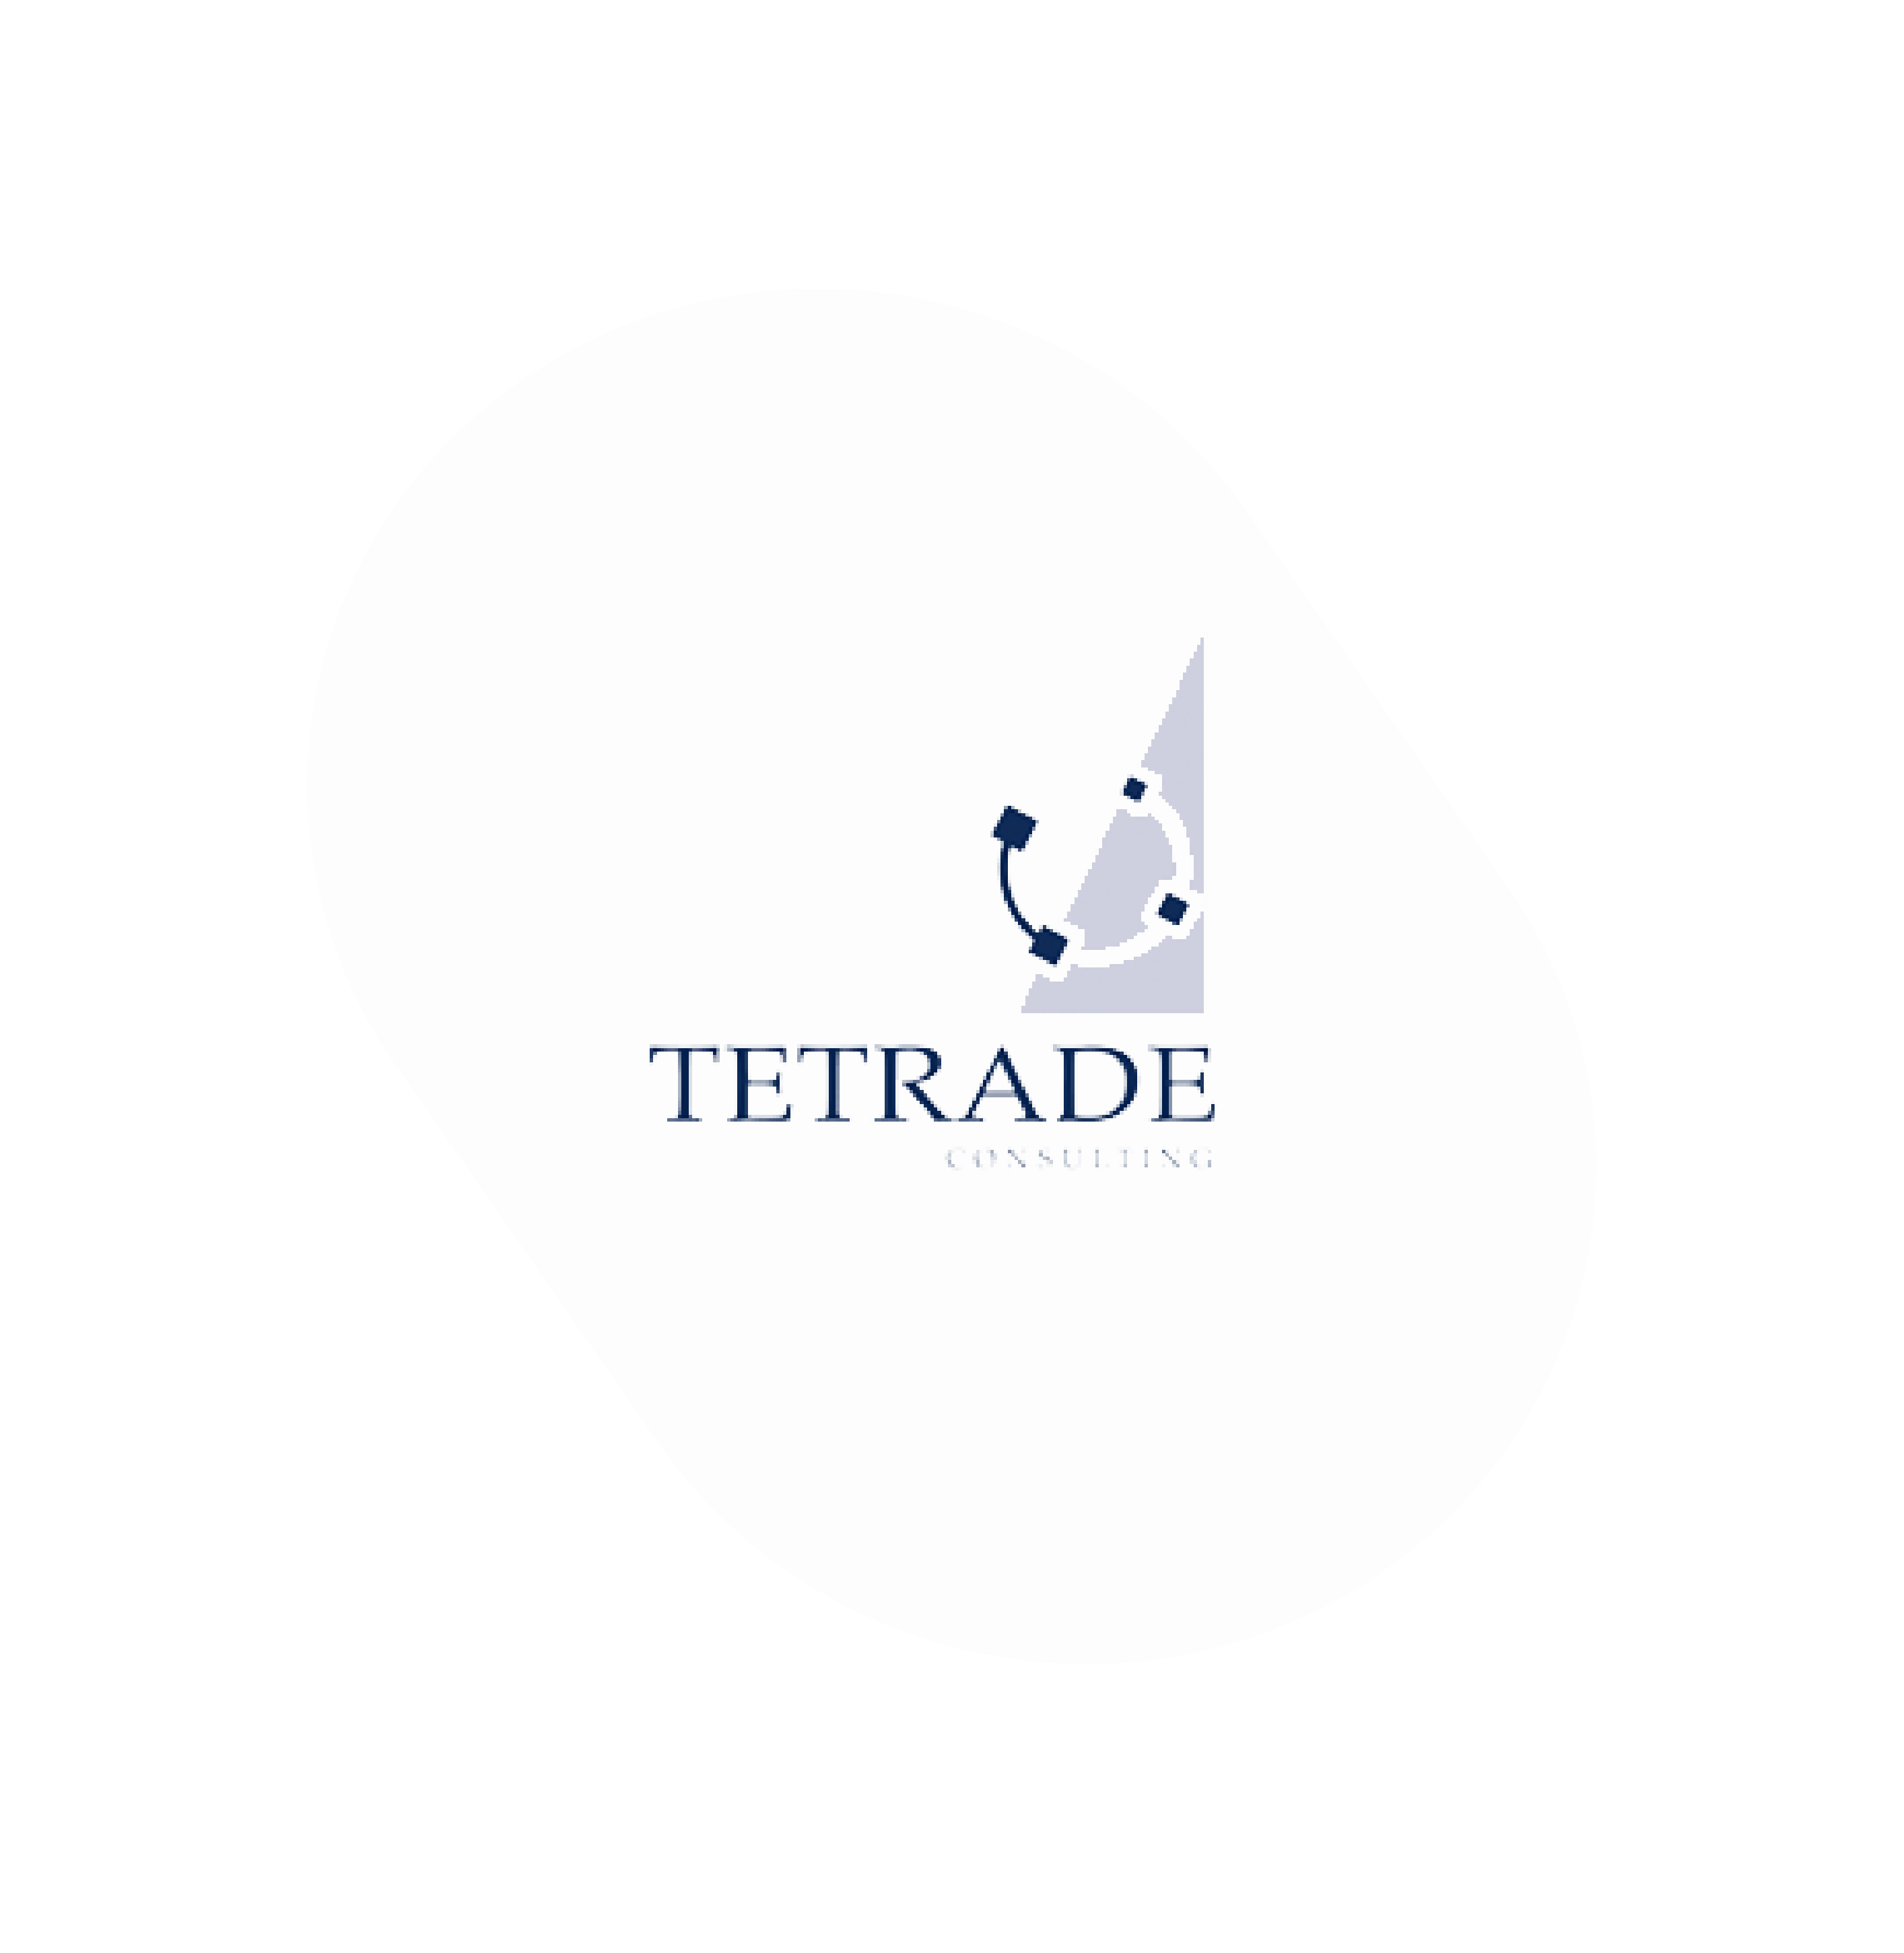  Acquisition of Tetrade Consulting